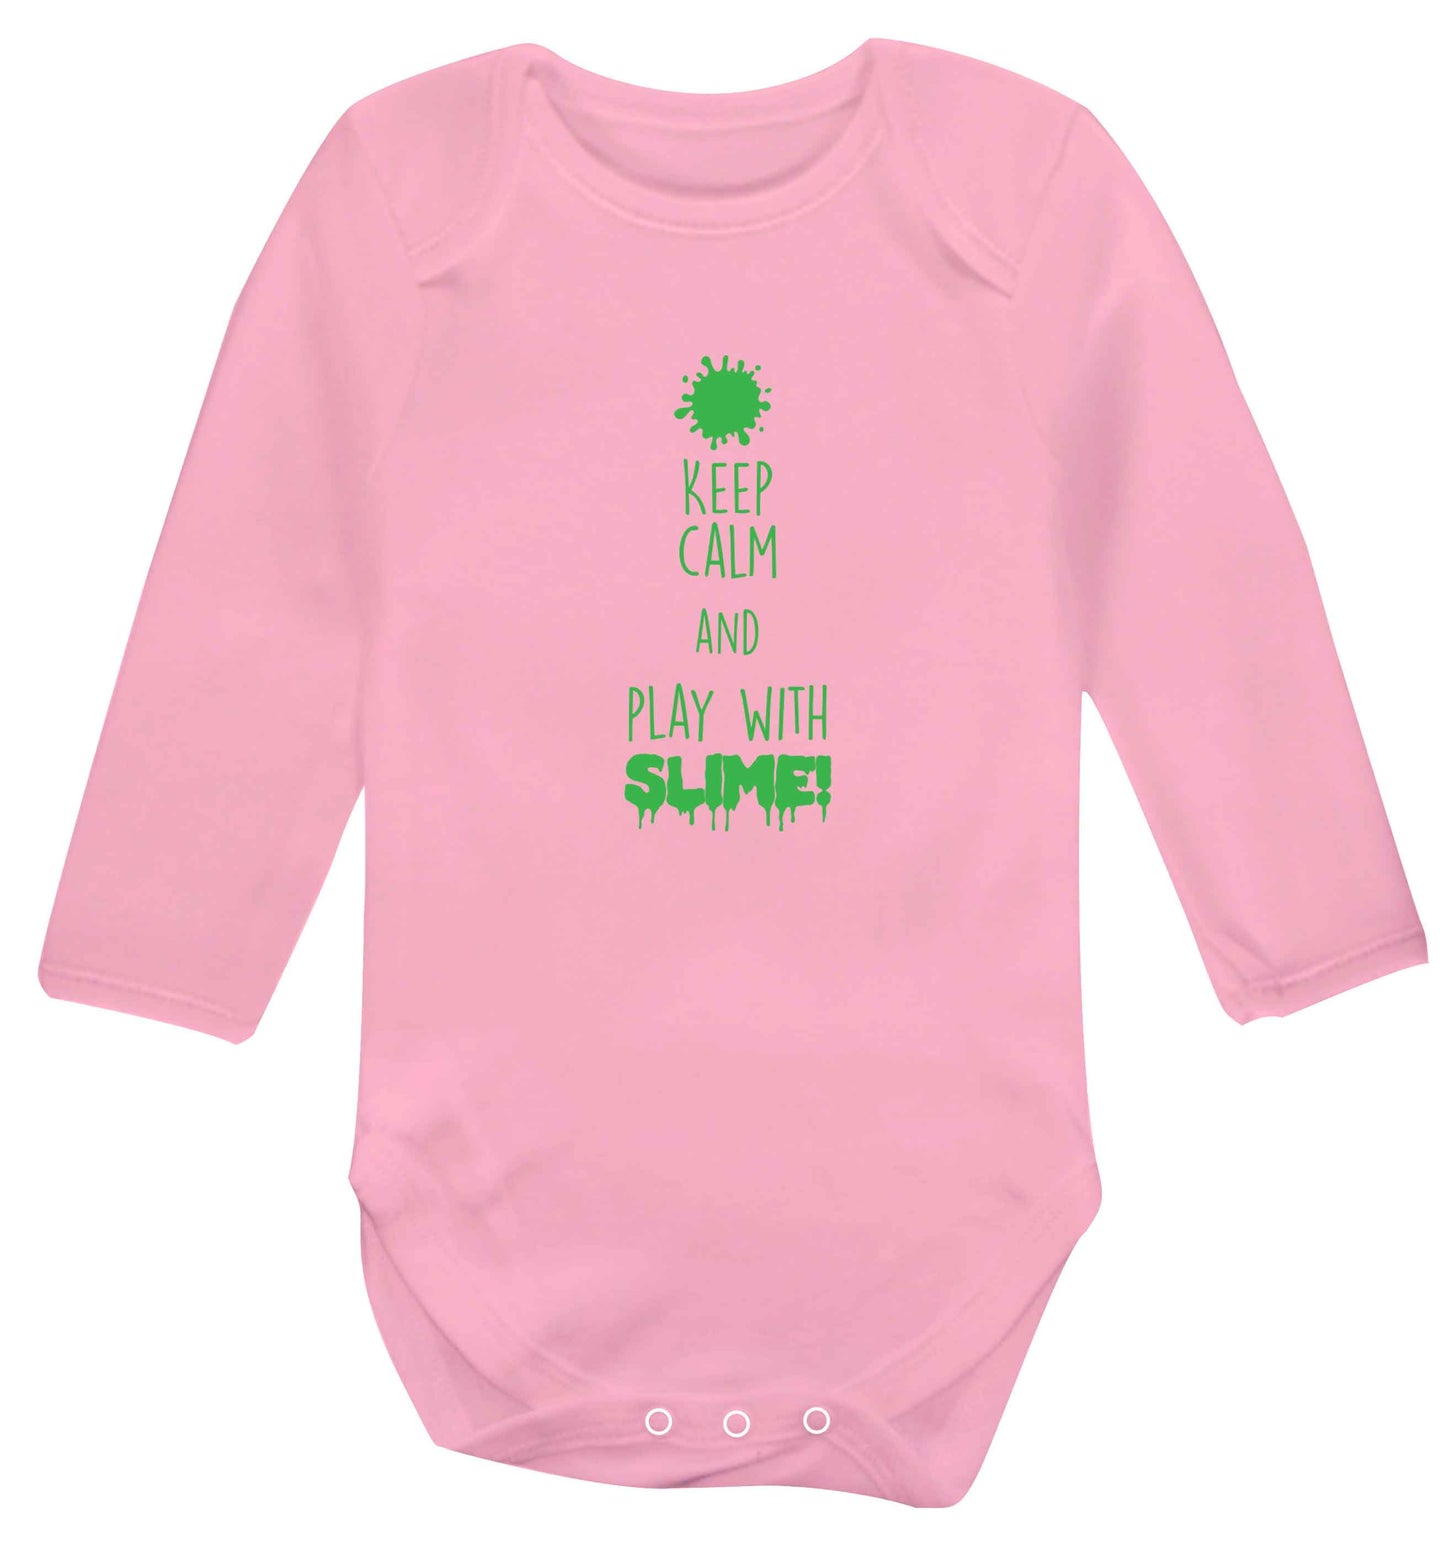 Neon green keep calm and play with slime!baby vest long sleeved pale pink 6-12 months